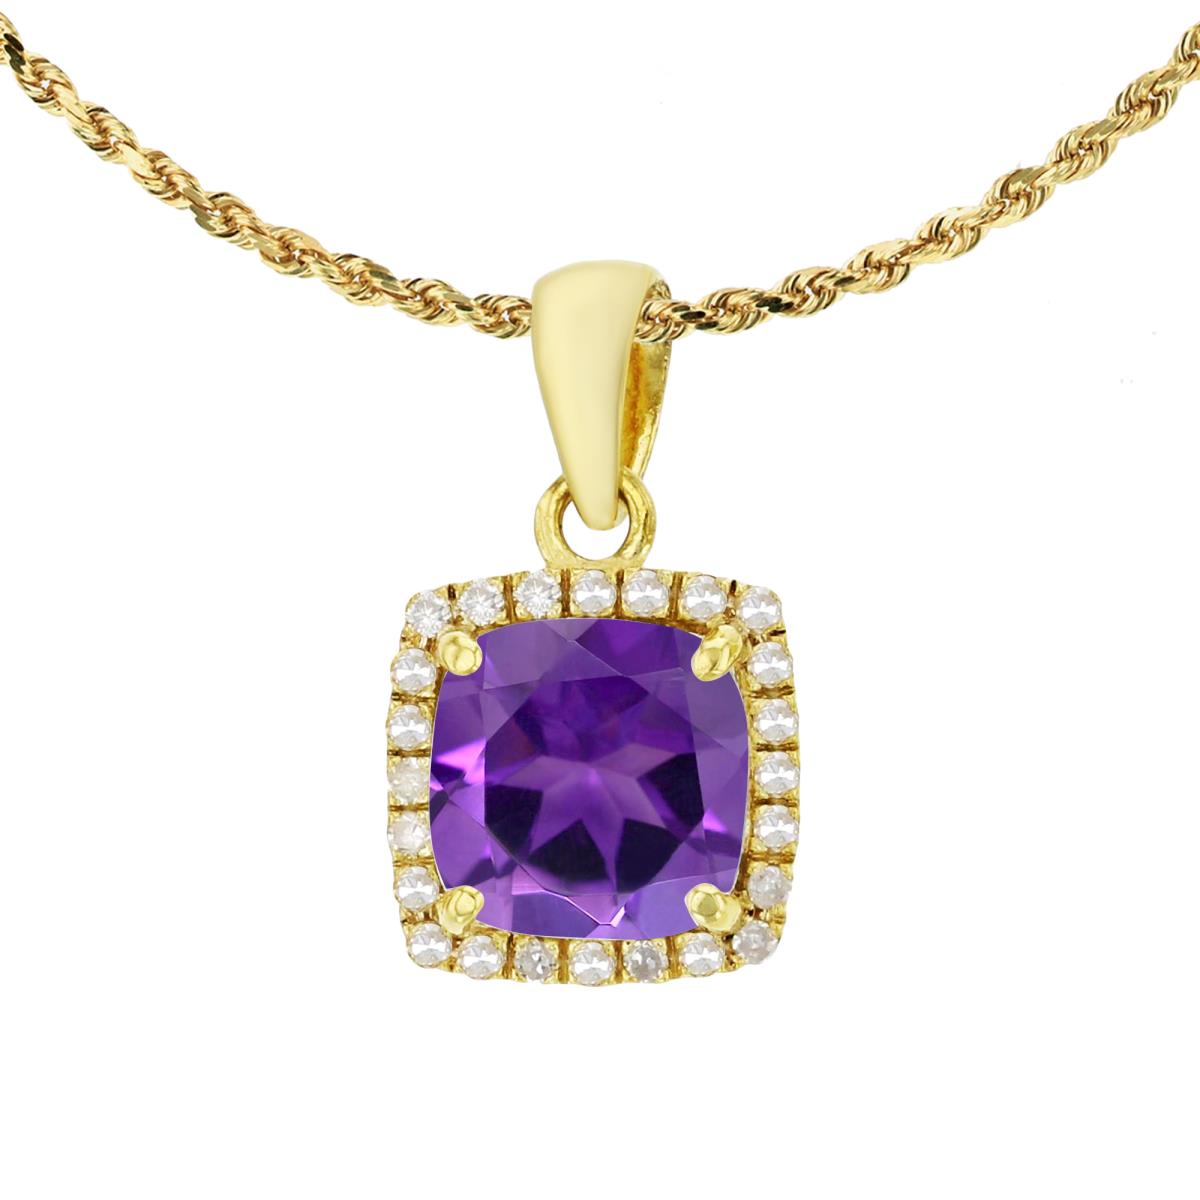 10K Yellow Gold 7mm Cushion Amethyst & 0.12 CTTW Diamond Halo 18" Rope Chain Necklace